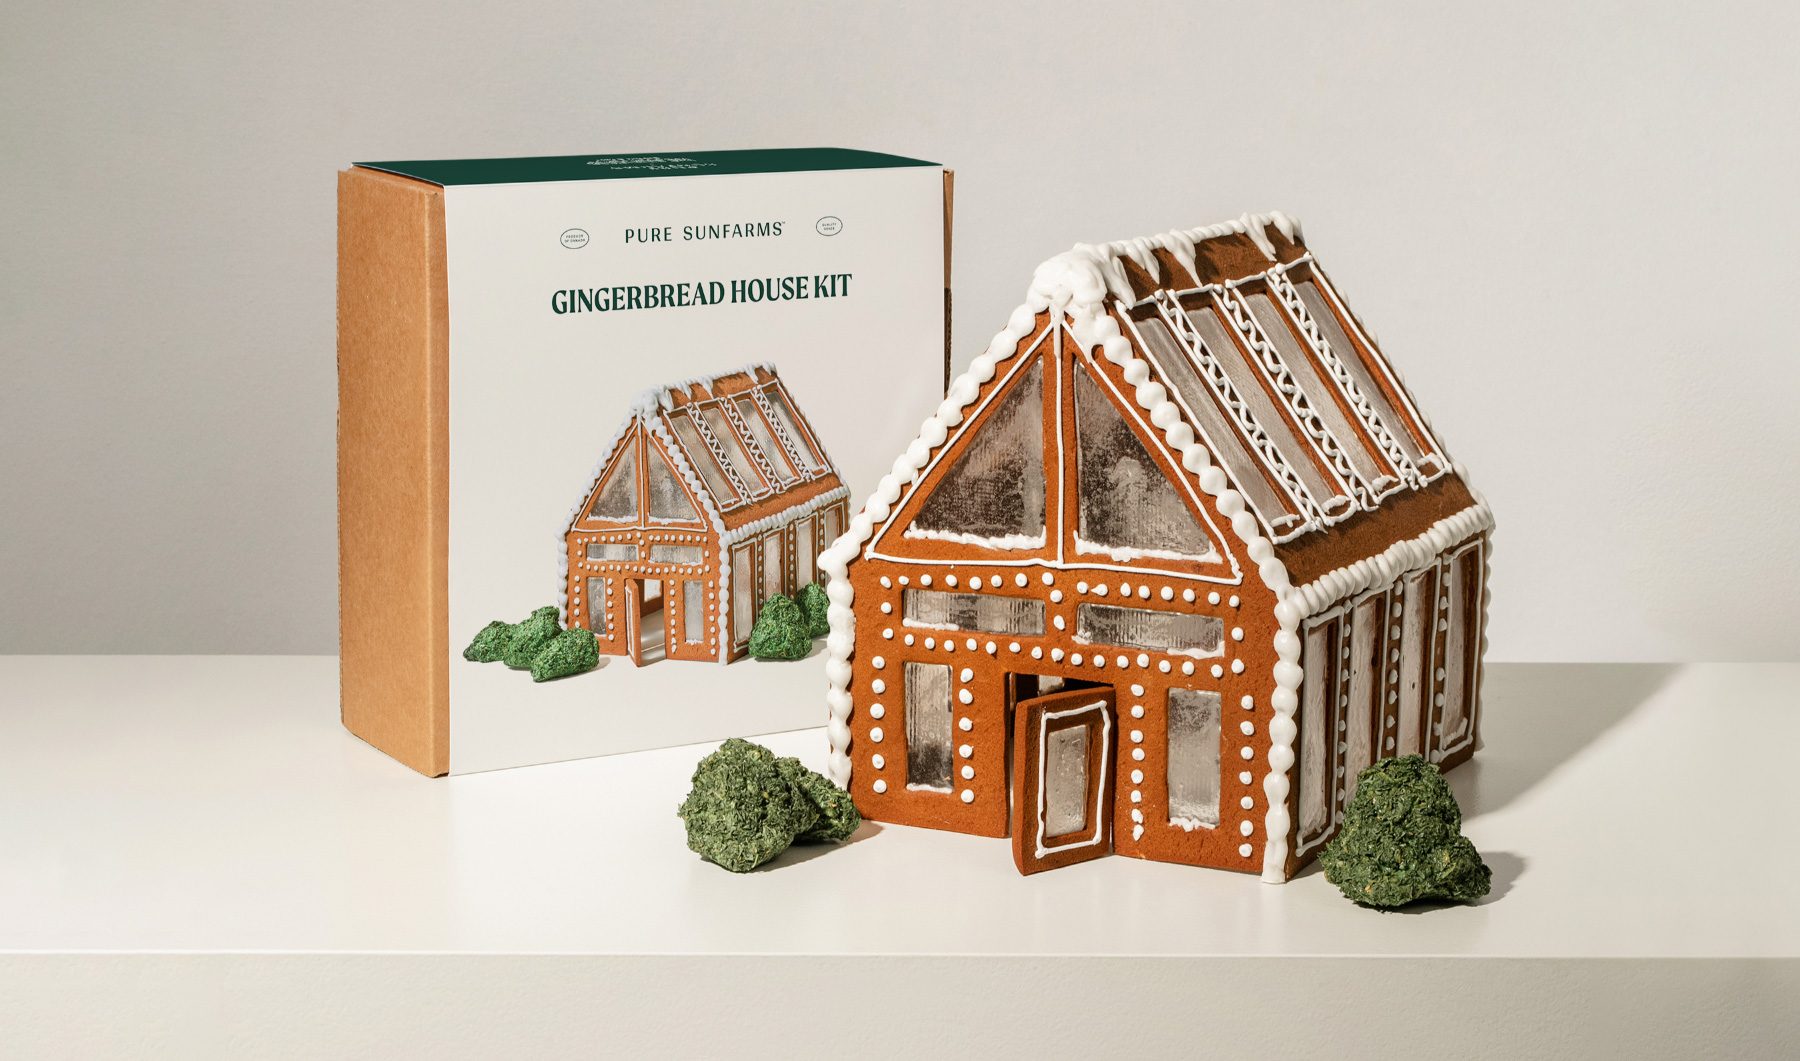 Gingerbread Housekit with packaging